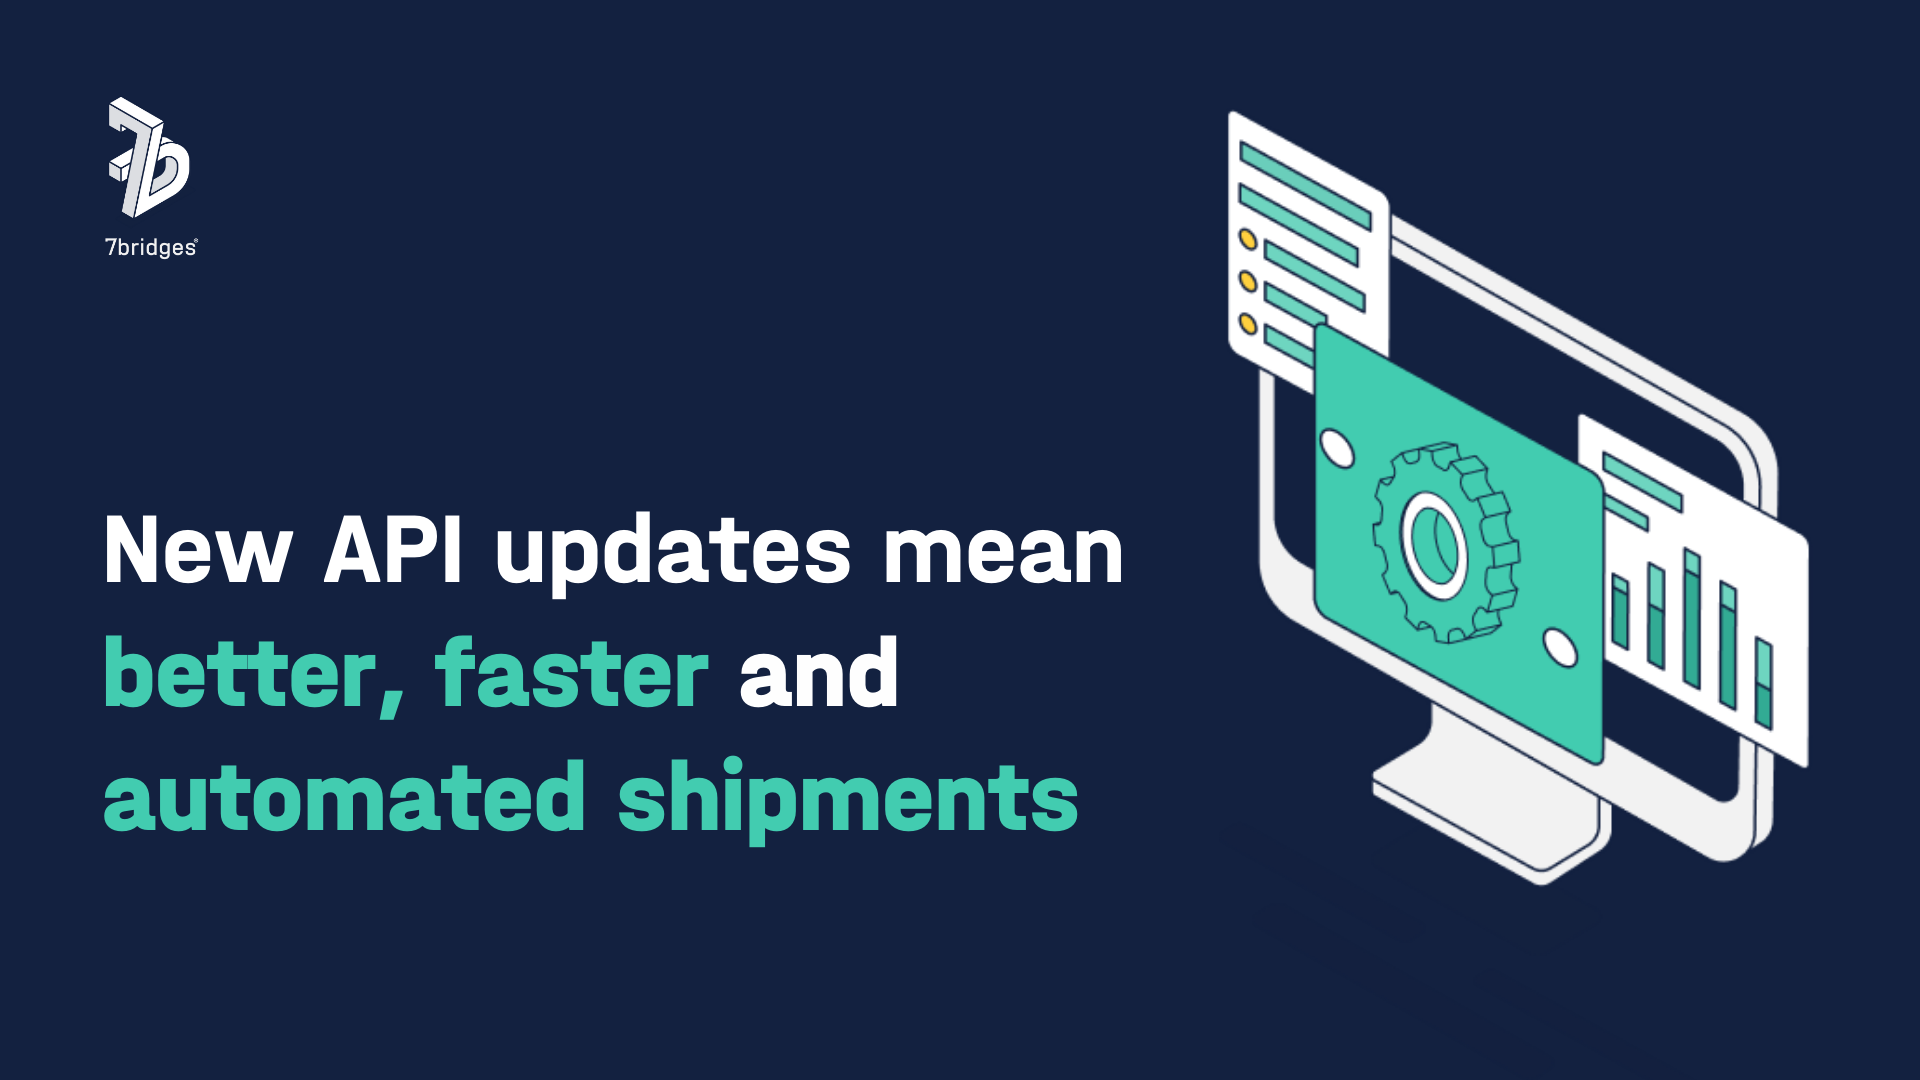 New API updates mean better, faster, automated shipments